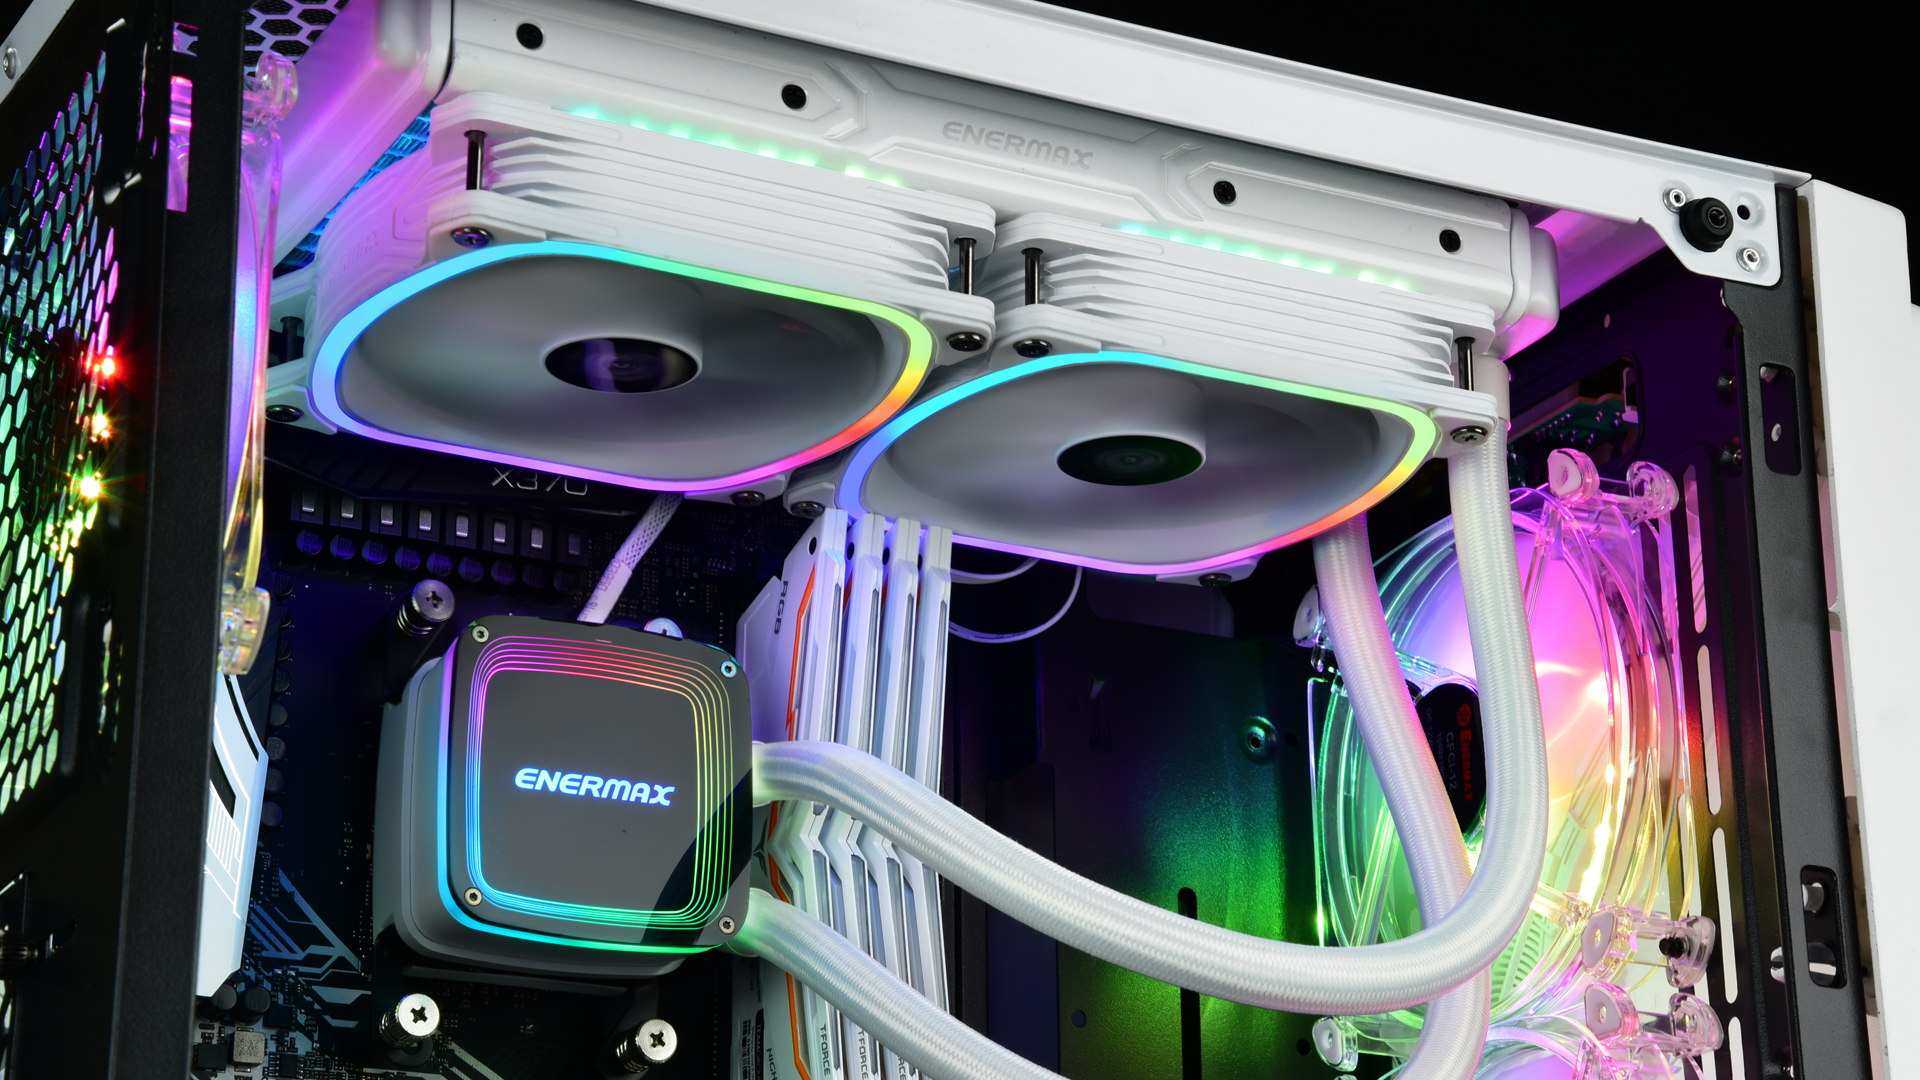 Are AIO pumps or radiator fans noisey? | [H]ard|Forum